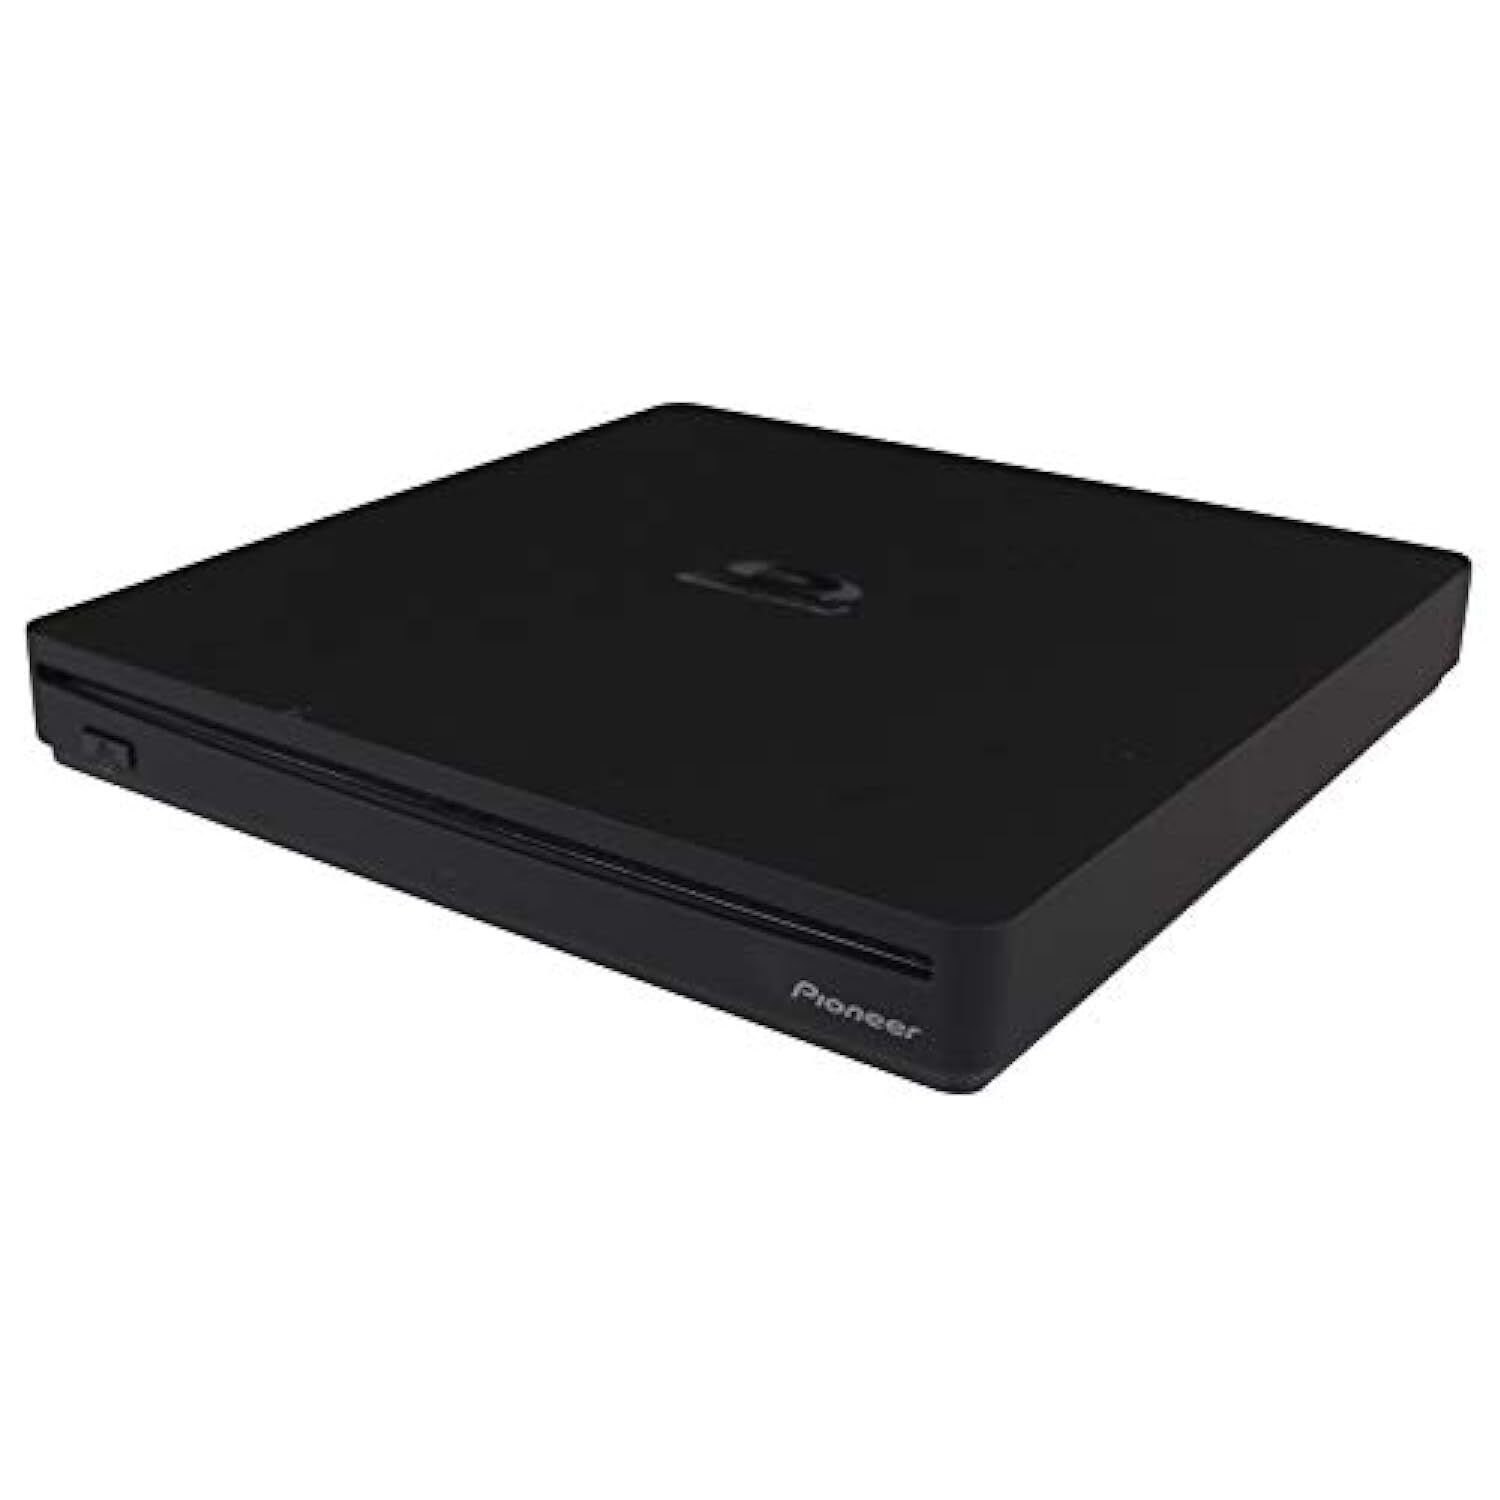 PIONEER External Blu-ray Drive BDR-XS07UHD@6X Slot Loading Portable with a Mat